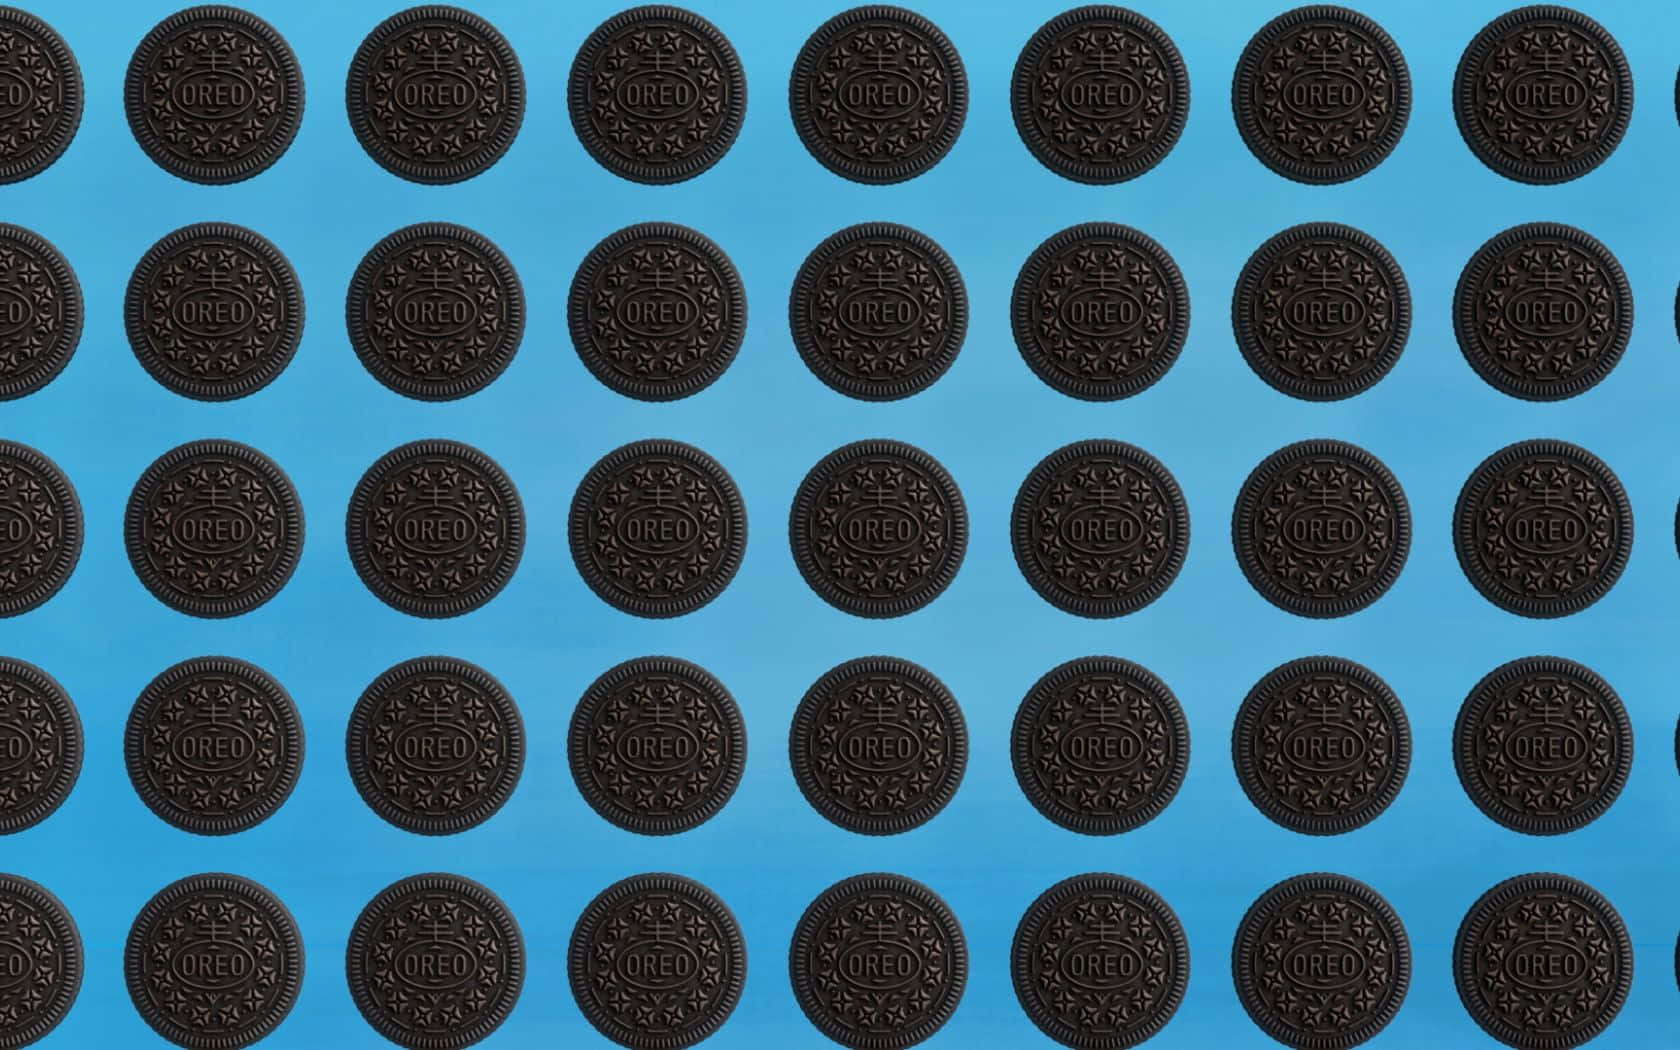 A blue background with rows of chocolate sandwich cookies. - Oreo